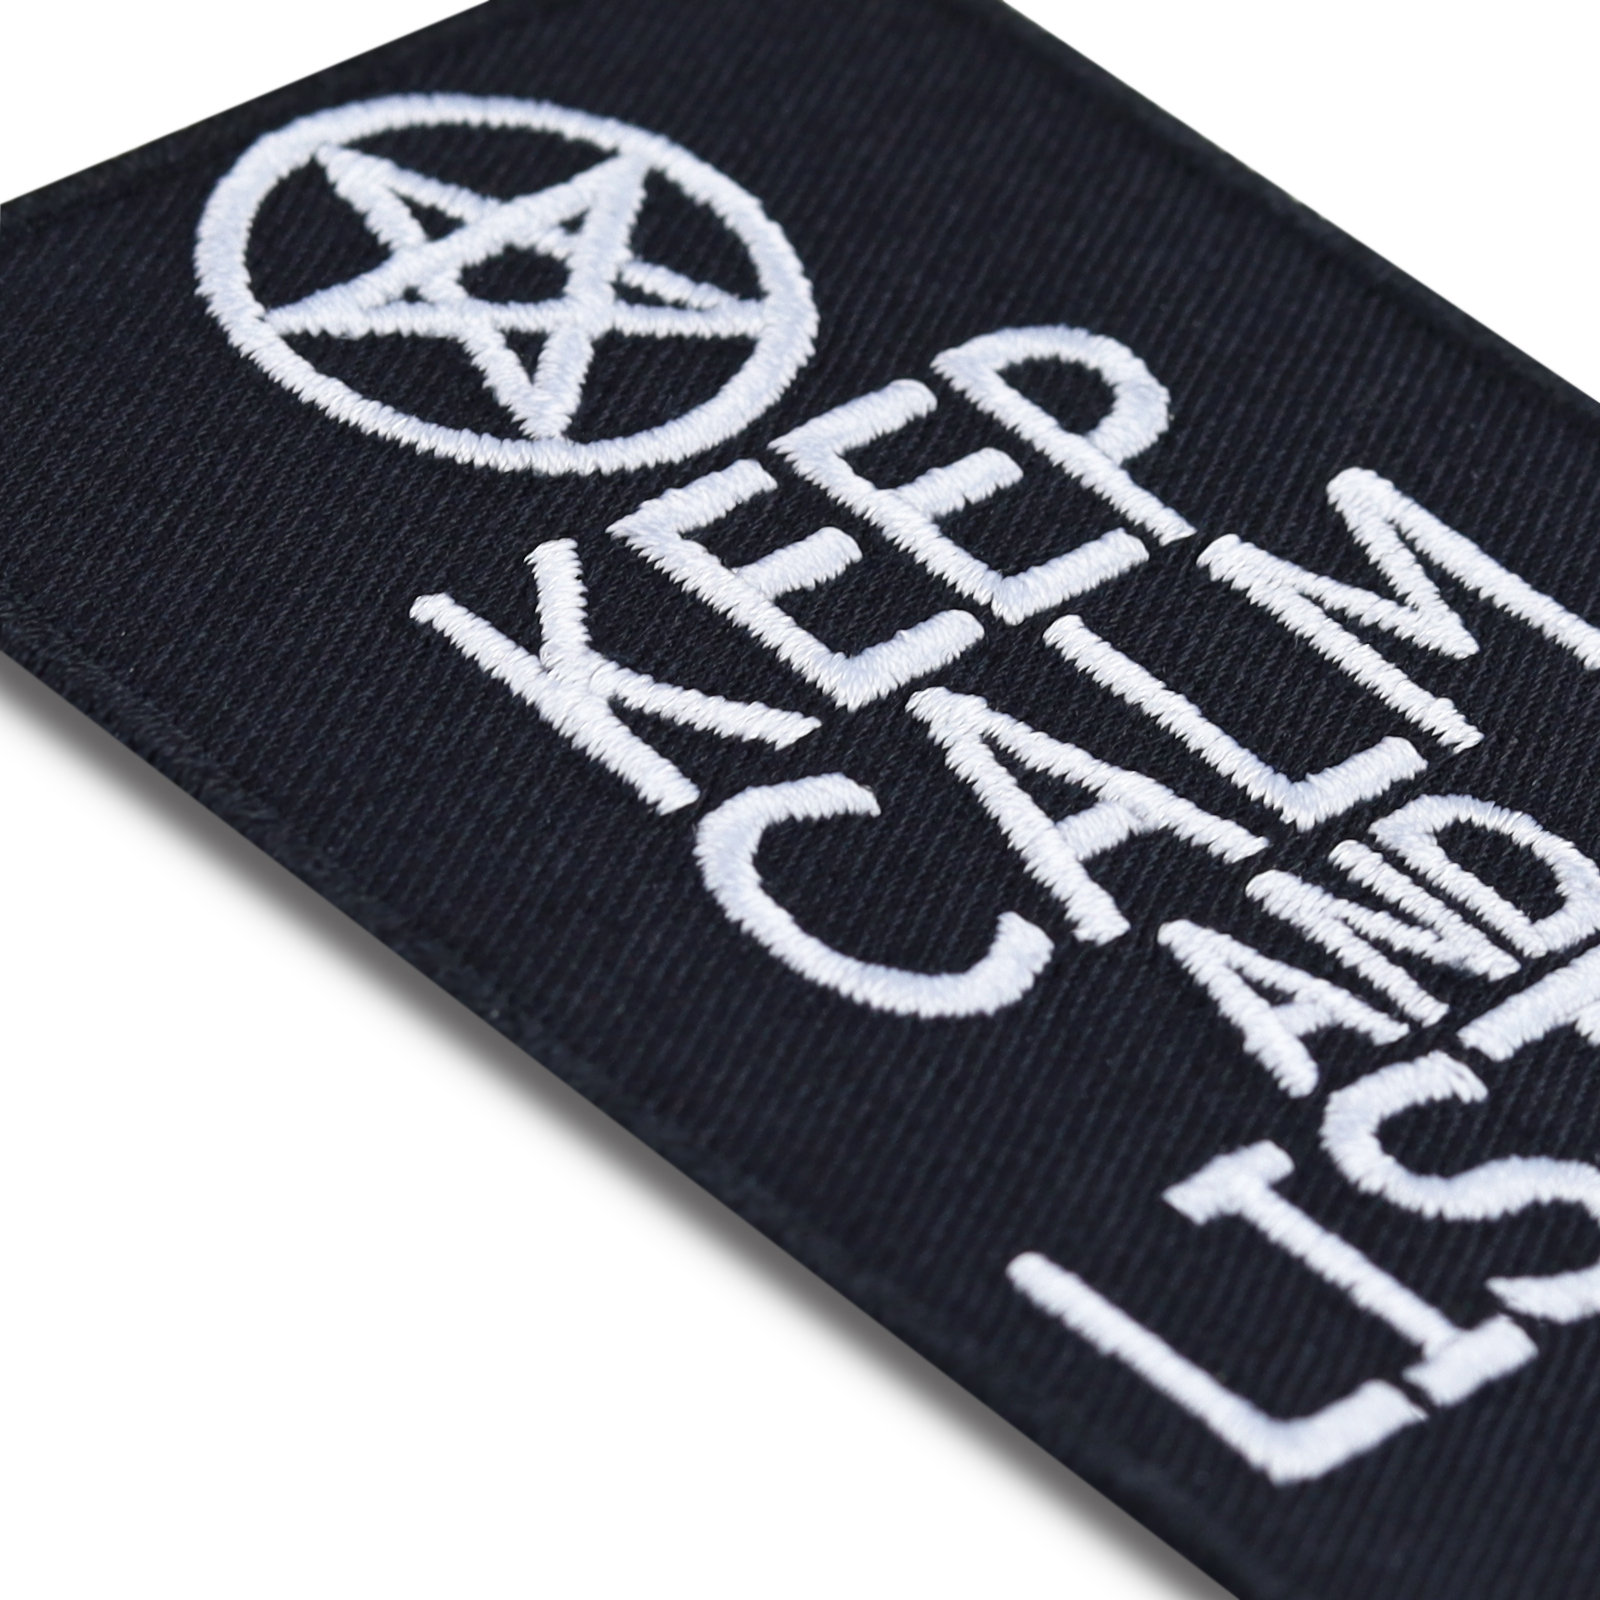 Keep calm and listen to Metal - Patch